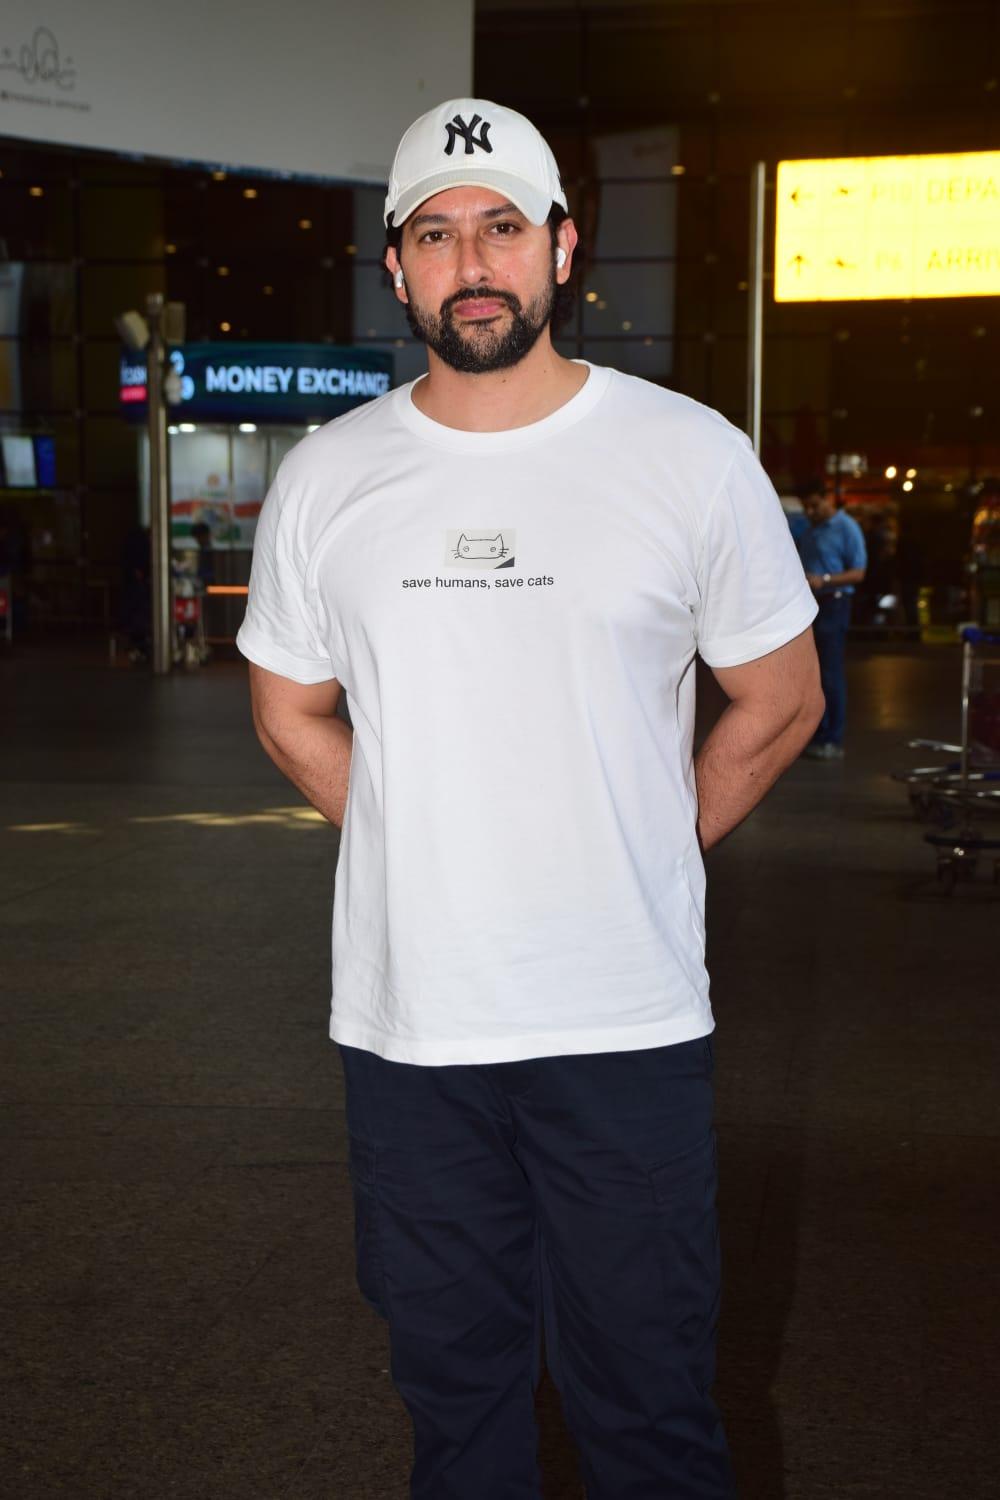 Aftab Shivdasani looked hot as he was snapped in a comfy outfit